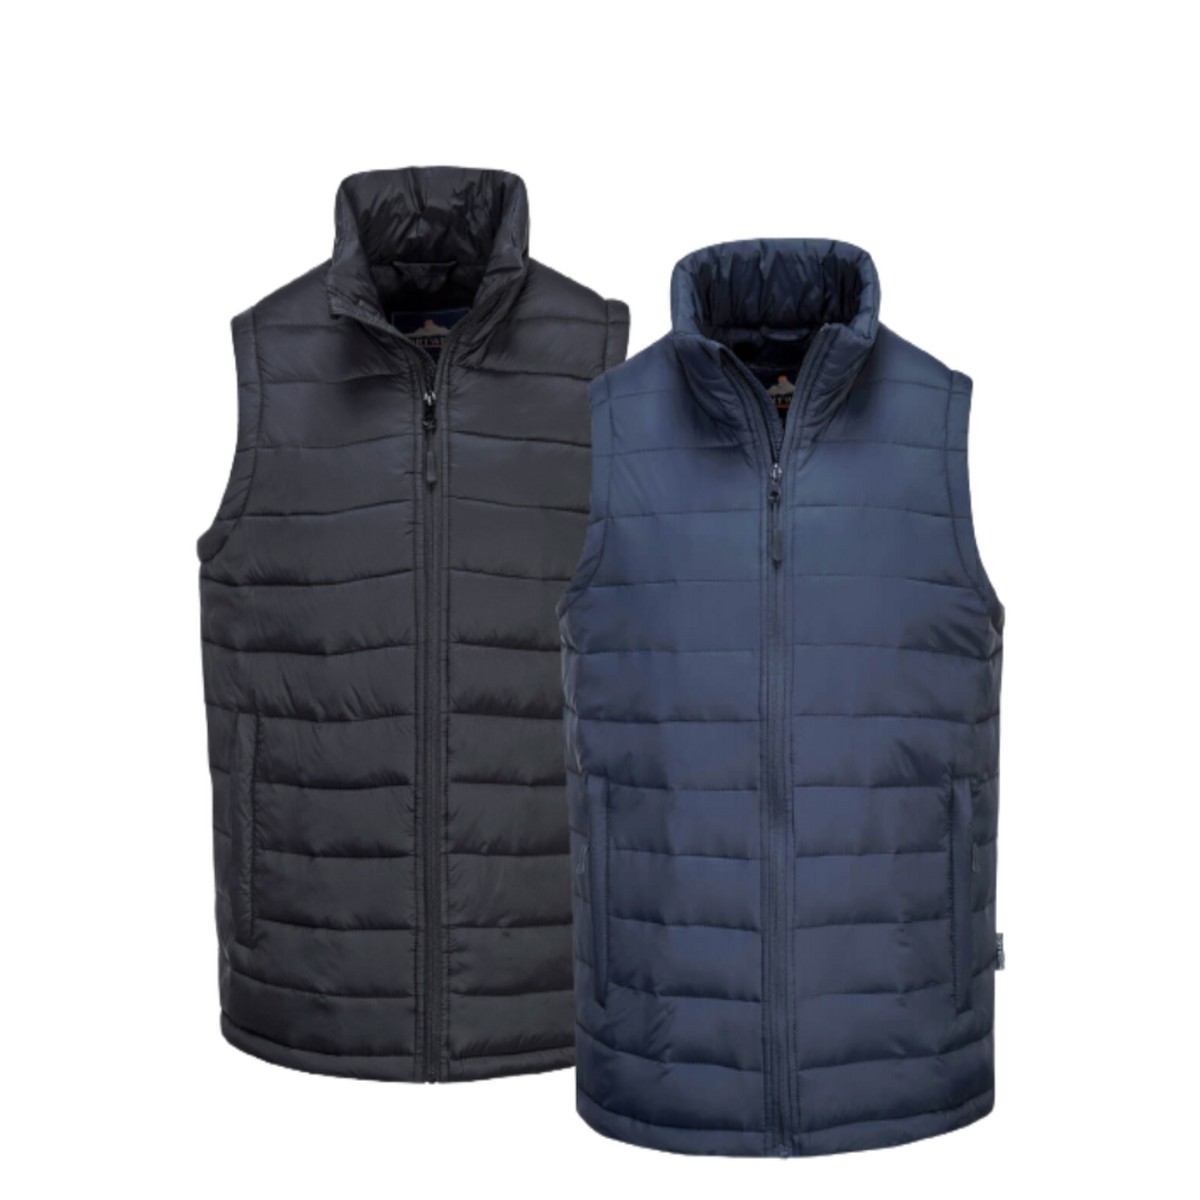 Portwest Mens Aspen Baffle Gilet Insulatex Padded Sleeveless Warmth Jacket S544-Collins Clothing Co